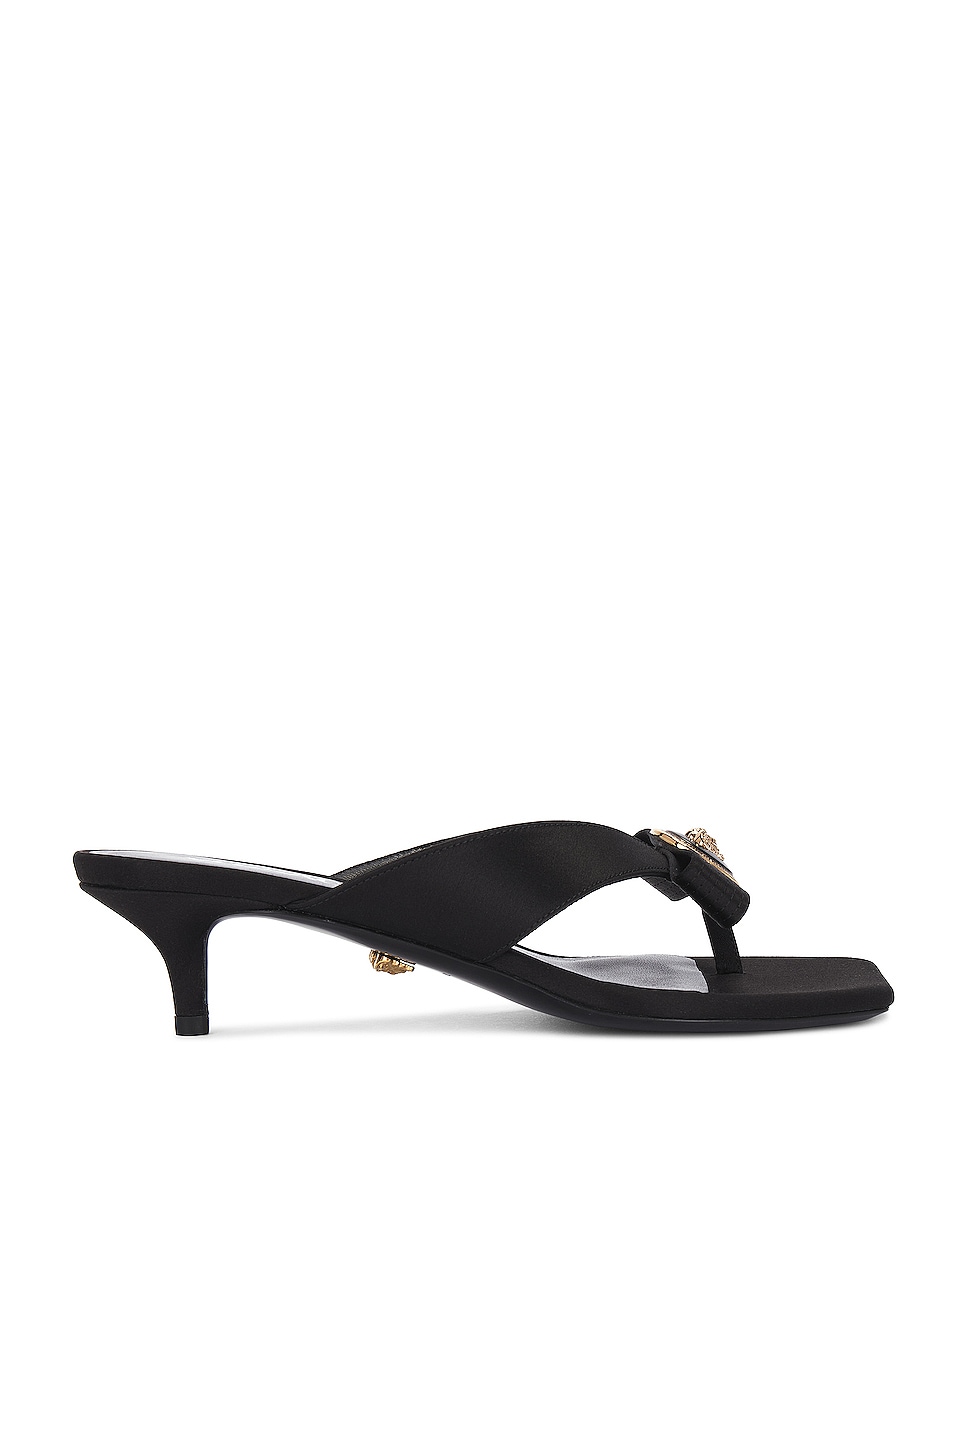 Image 1 of VERSACE Fabric Sandals in Black